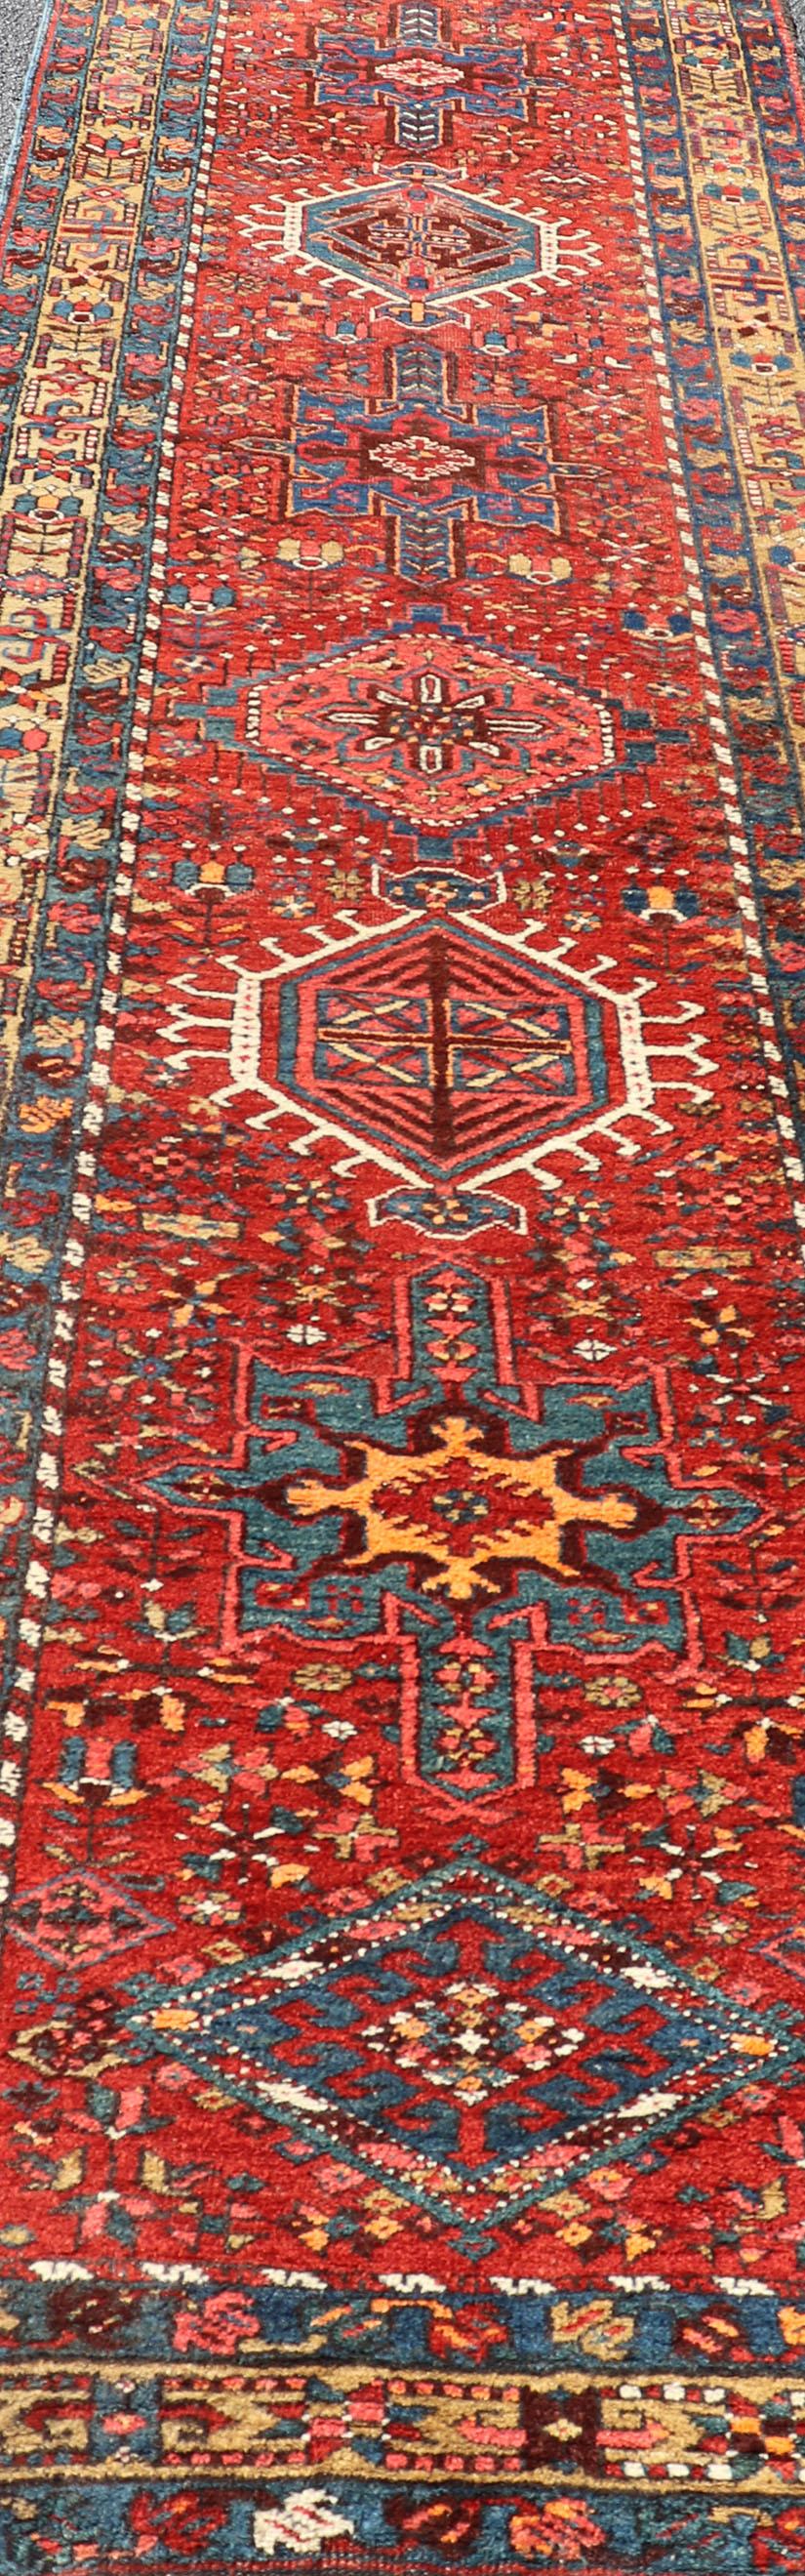 Early 20th Century Antique Geometric Persian Long Heriz Runner in Red, Blue, Yellow, Teal, Orange For Sale